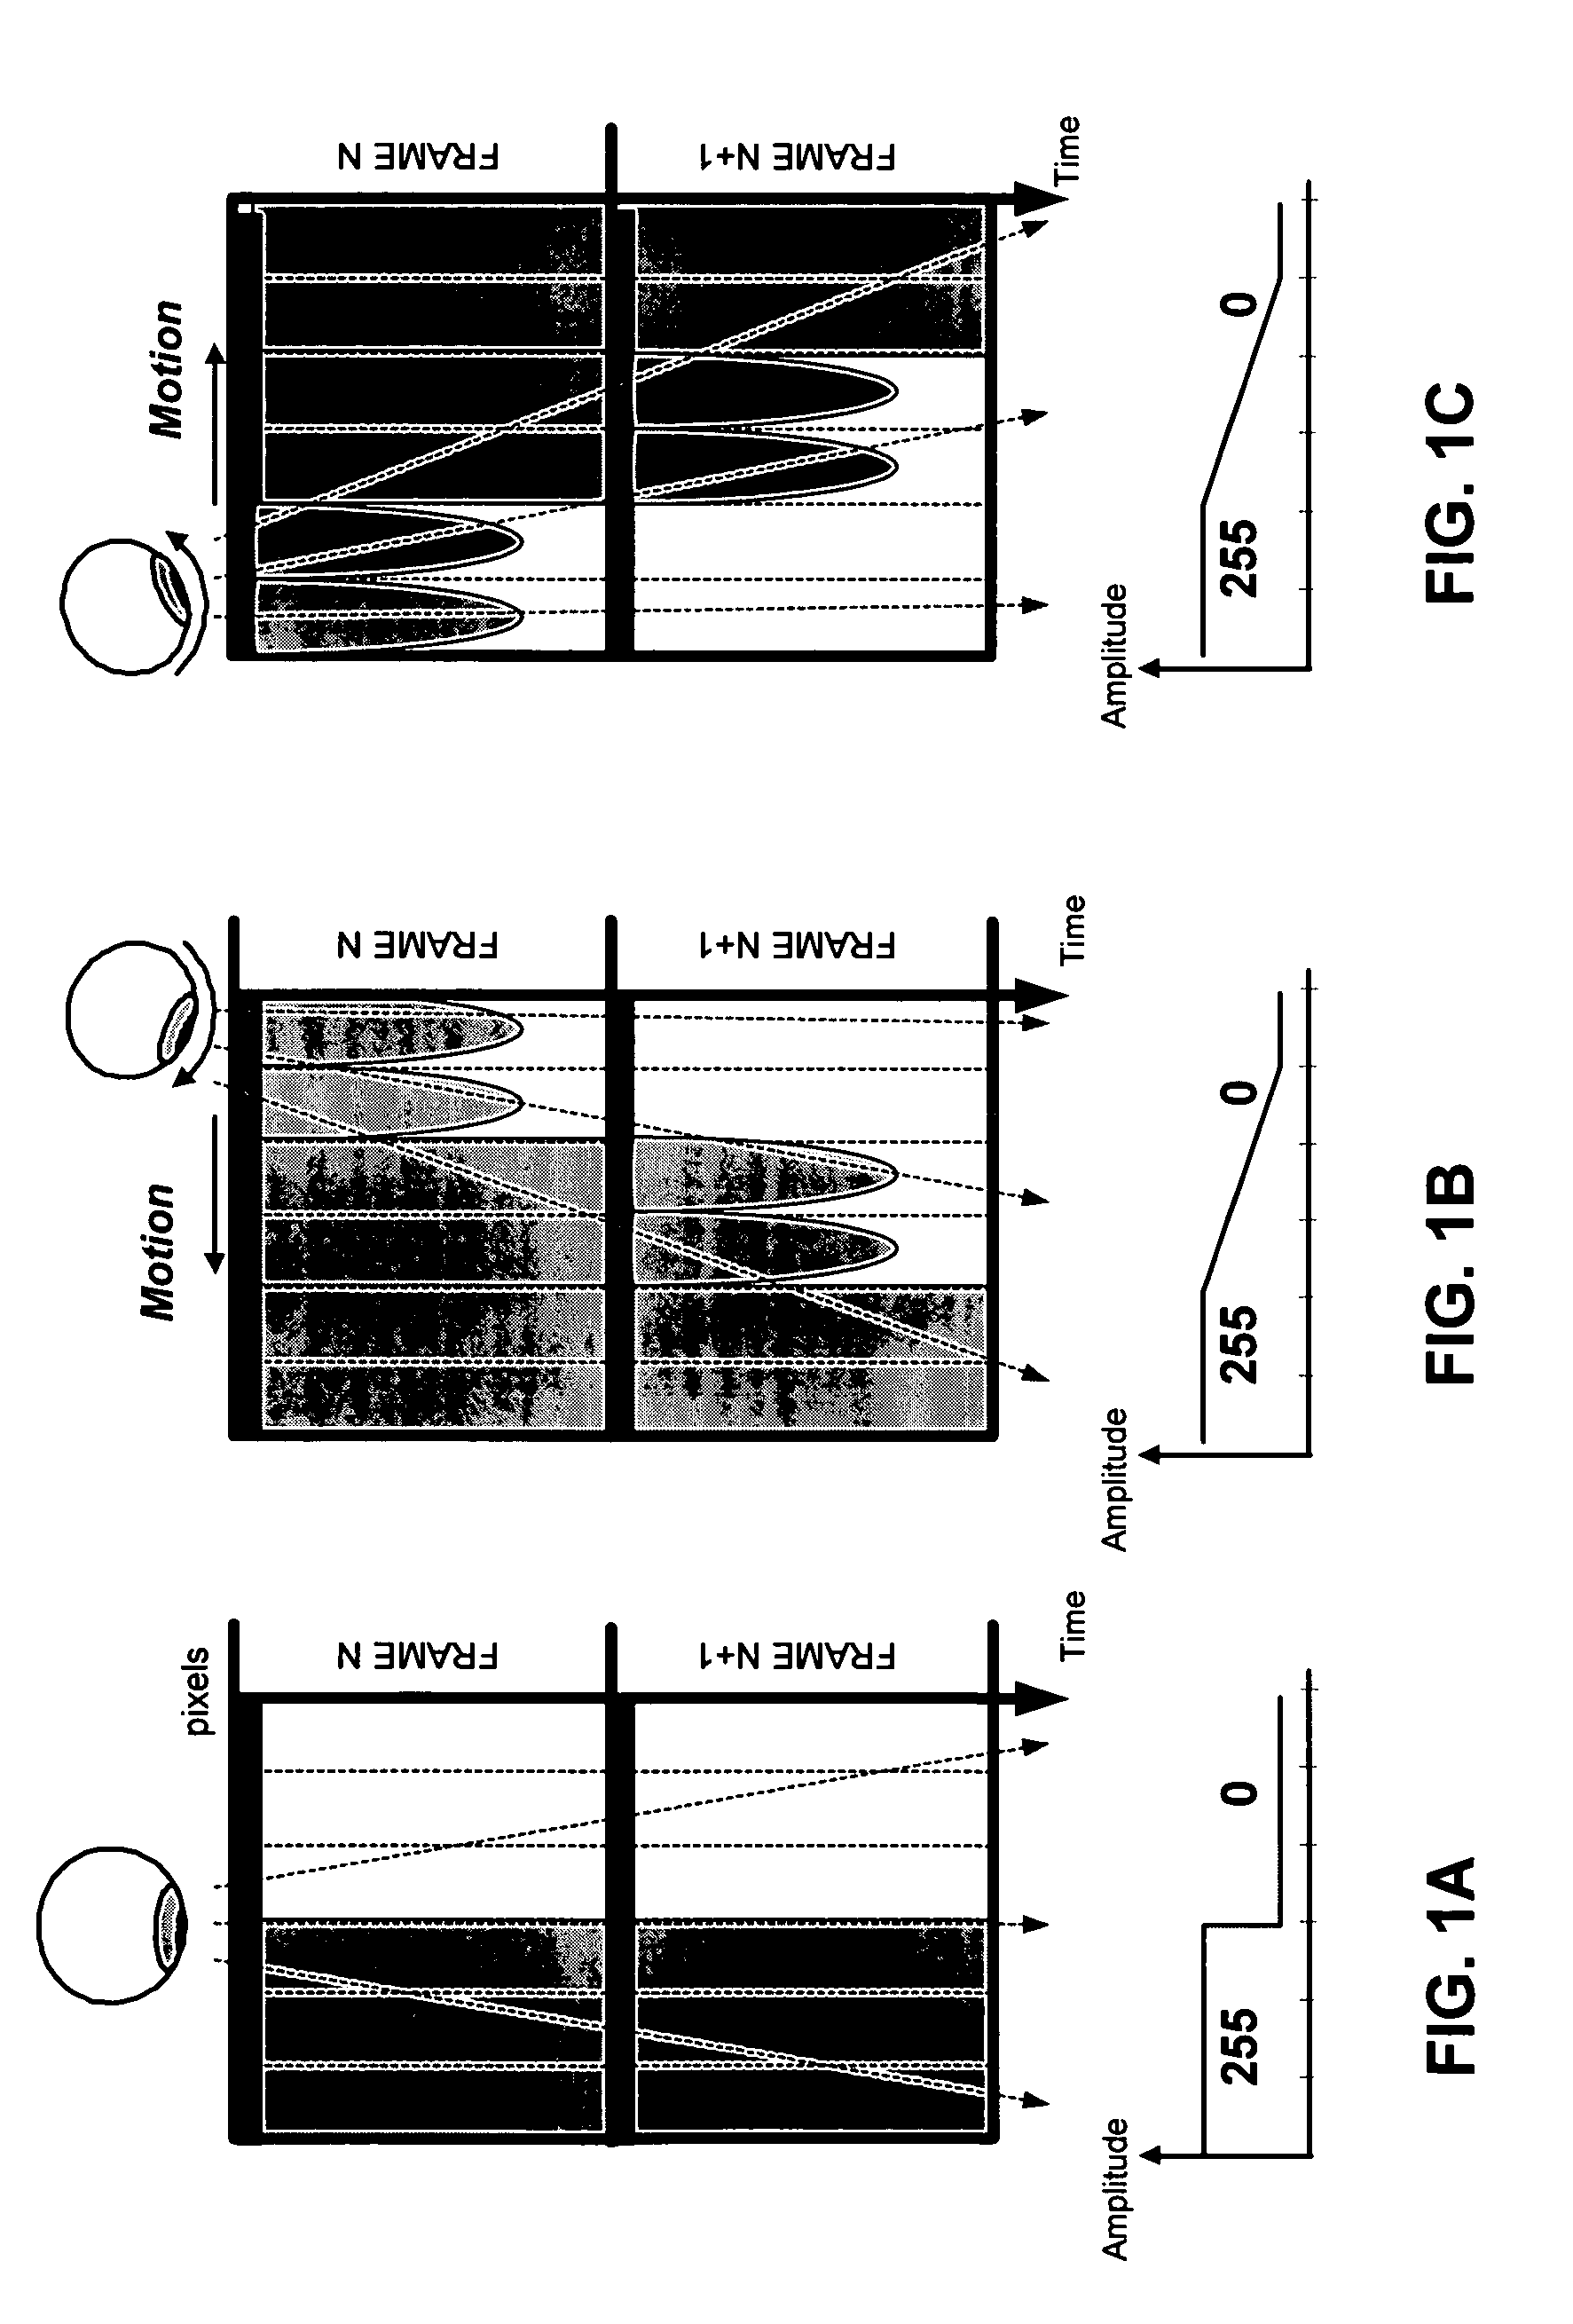 Method of processing a video image sequence in a liquid crystal display panel